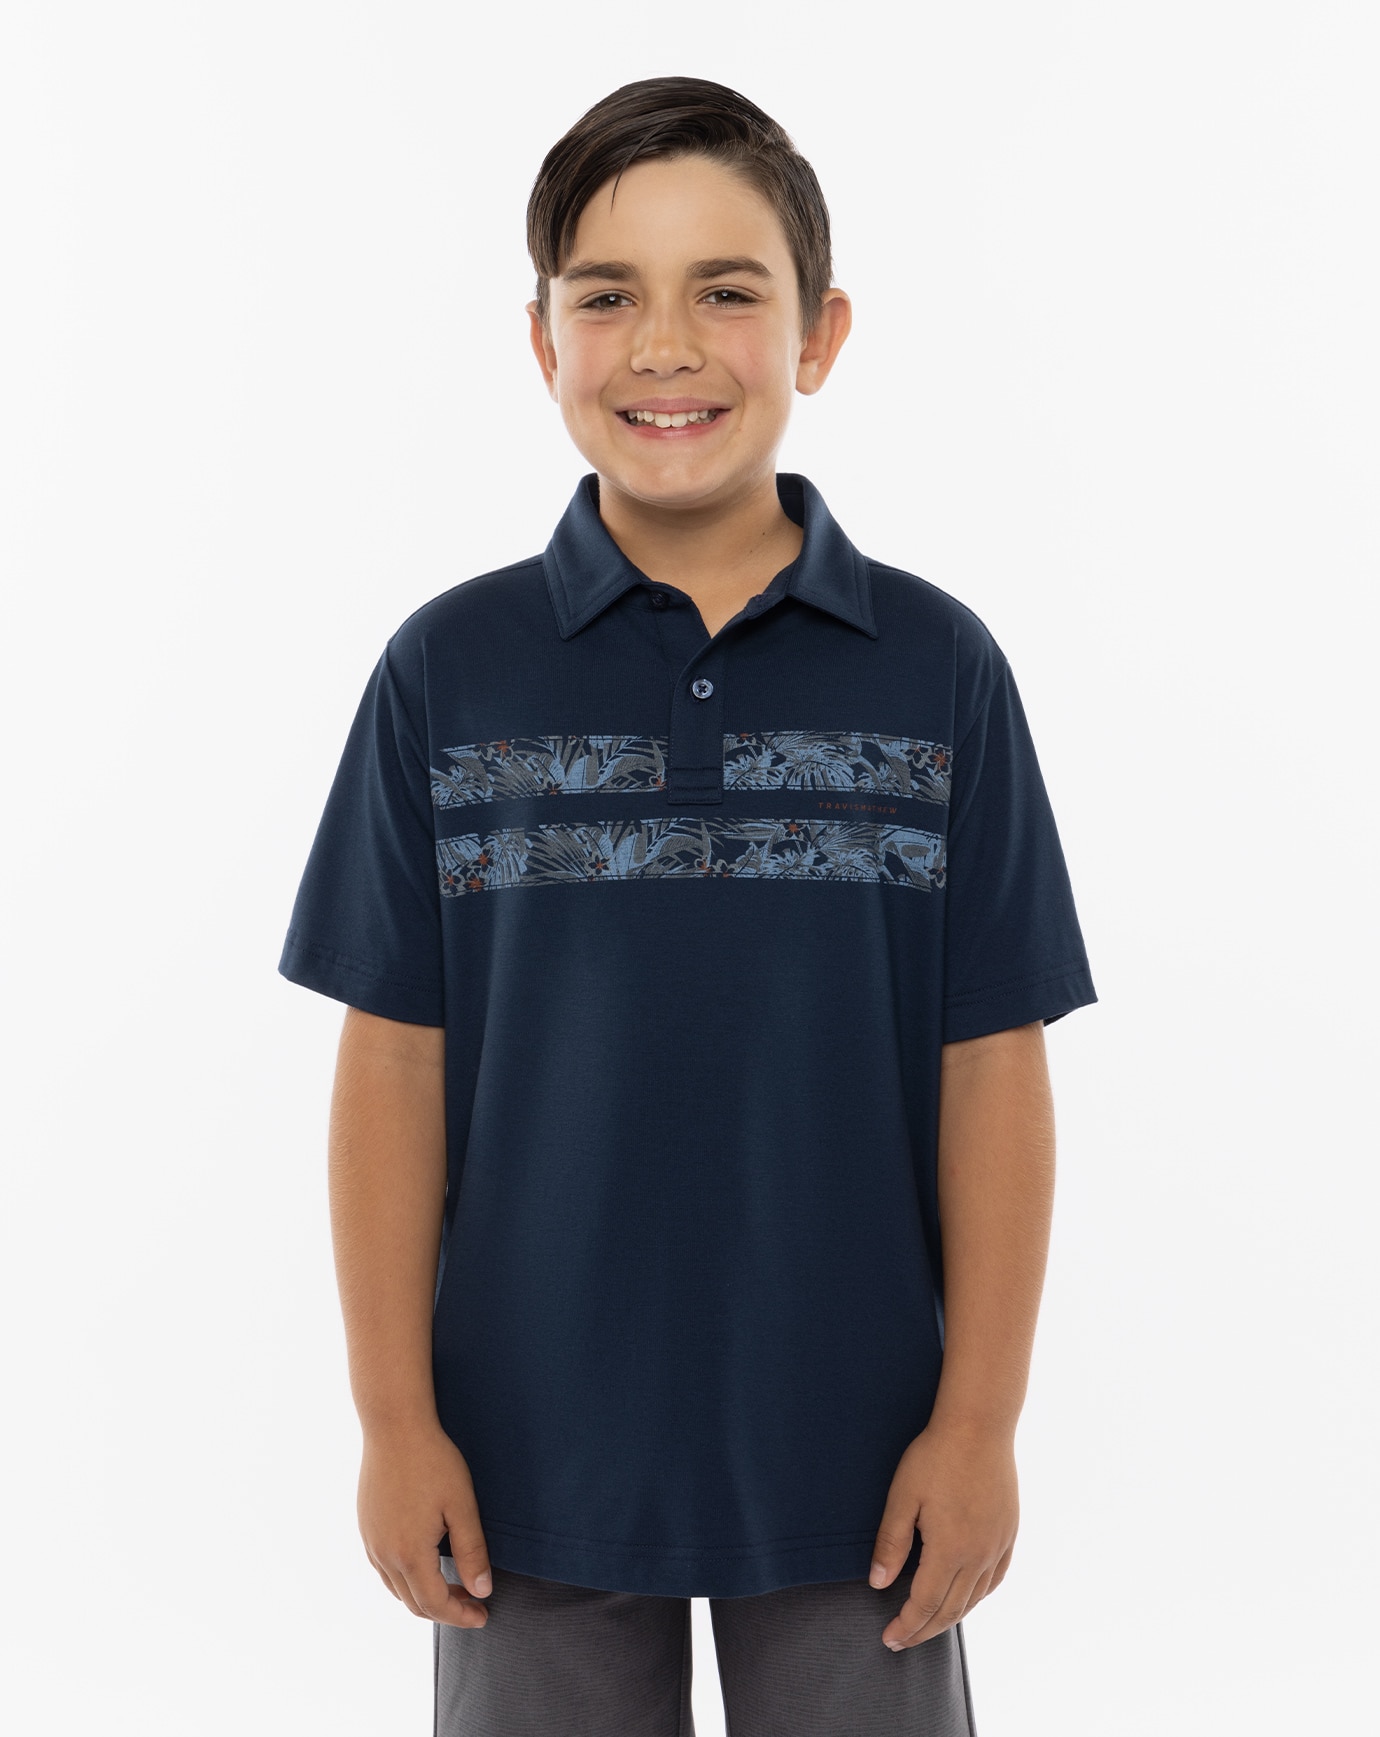 PIER RUNNER YOUTH POLO Image Thumbnail 1